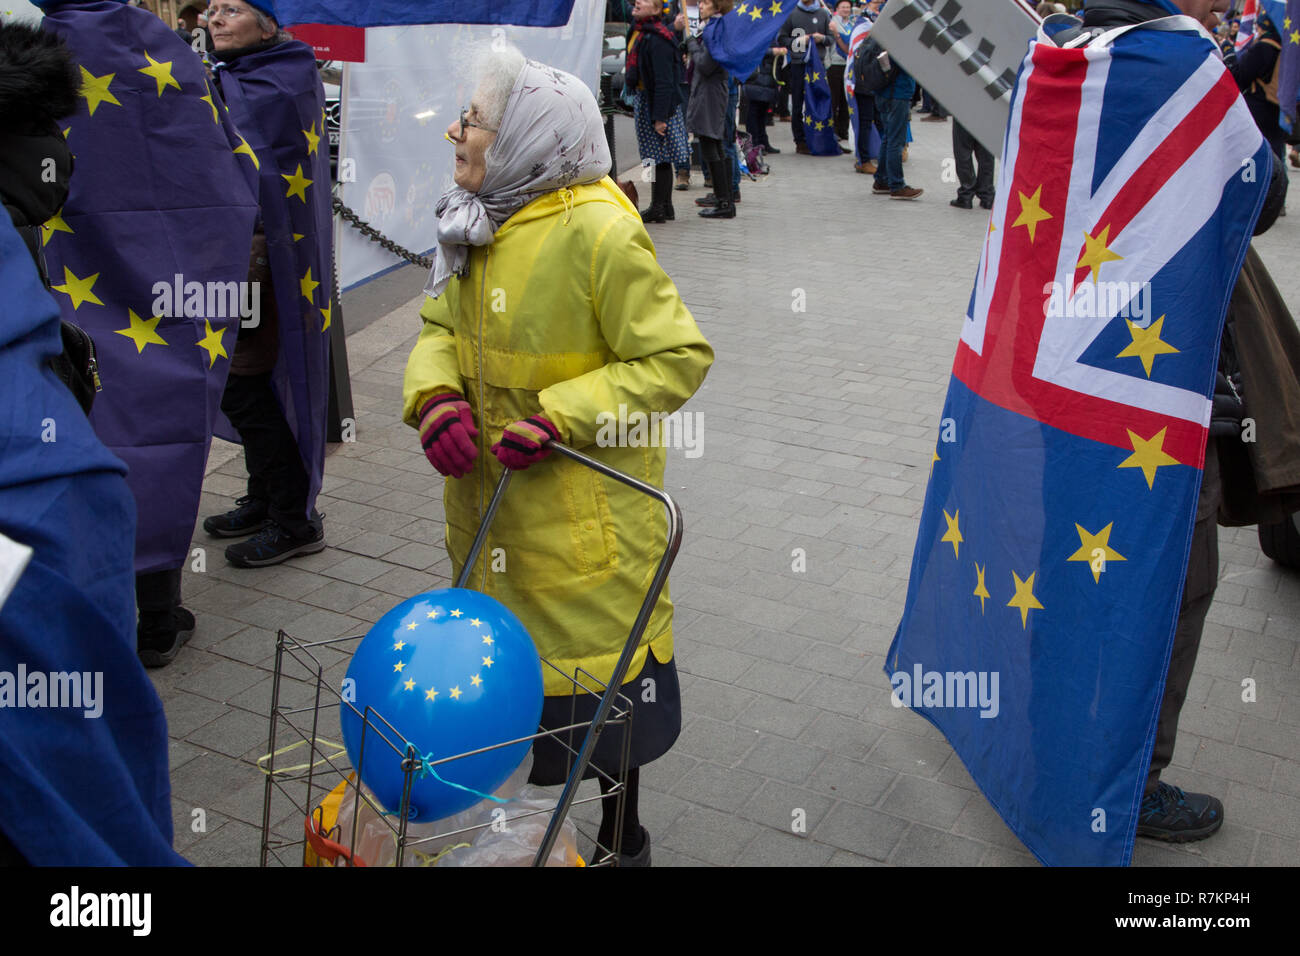 London, UK. 10th Dec, 2018. Anti Brexit protesters demonstrate with EU flags outside the Houses of Parliament. Credit: Thabo Jaiyesimi/Alamy Live News Stock Photo